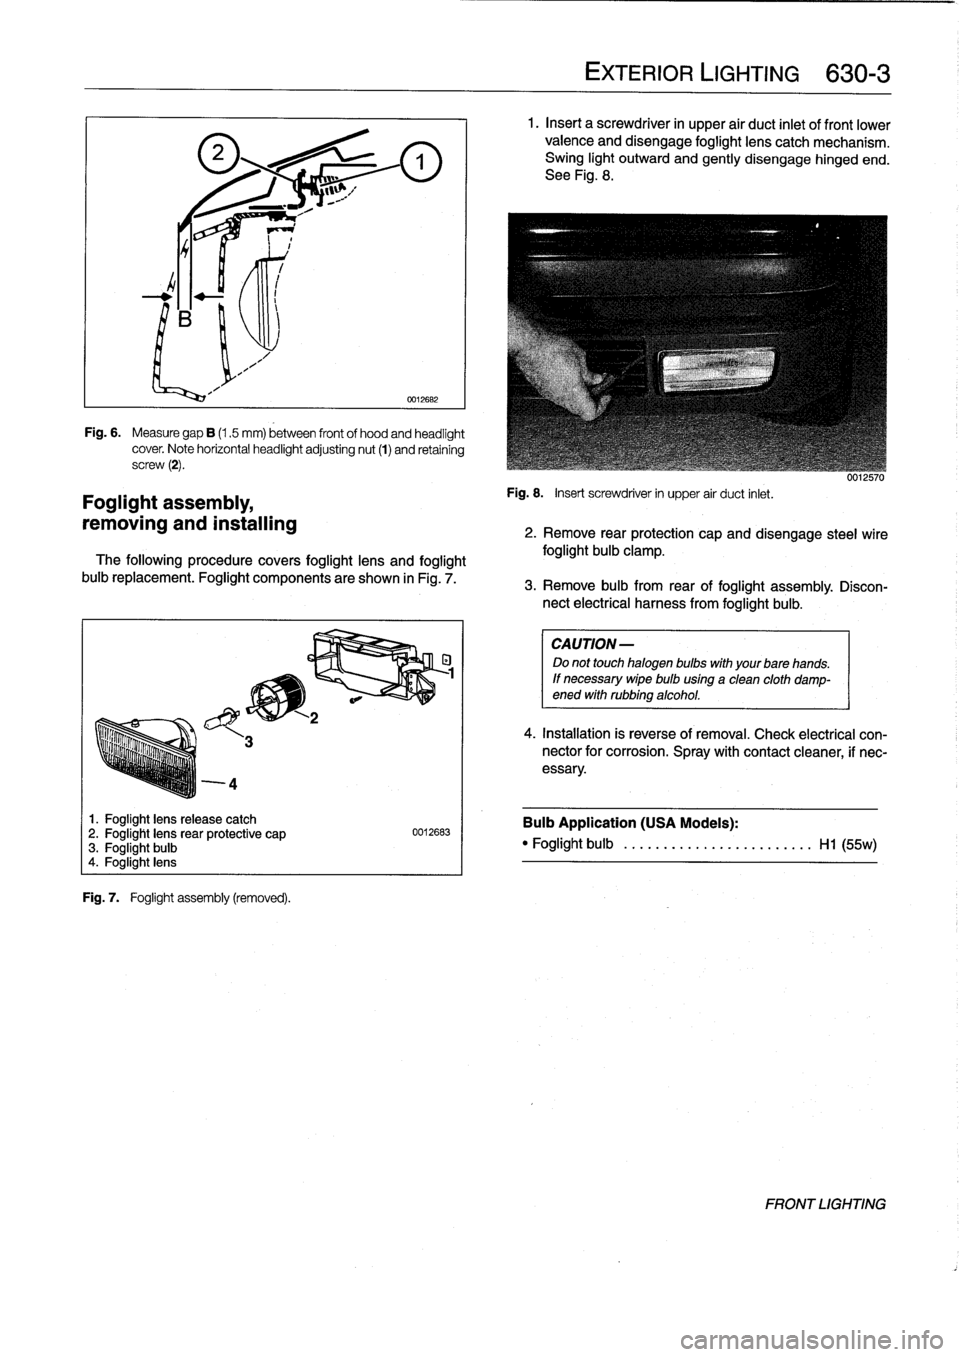 BMW 323i 1993 E36 Workshop Manual 4

Foglight
assembly,

removing
and
installing

1
.
Foglight
lens
release
catch
2
.
Foglight
lensrear
protective
cap
3
.
Foglight
bulb
4
.
Foglight
lens

Fig
.
7
.

	

Foglight
assembly
(removed)
.

0